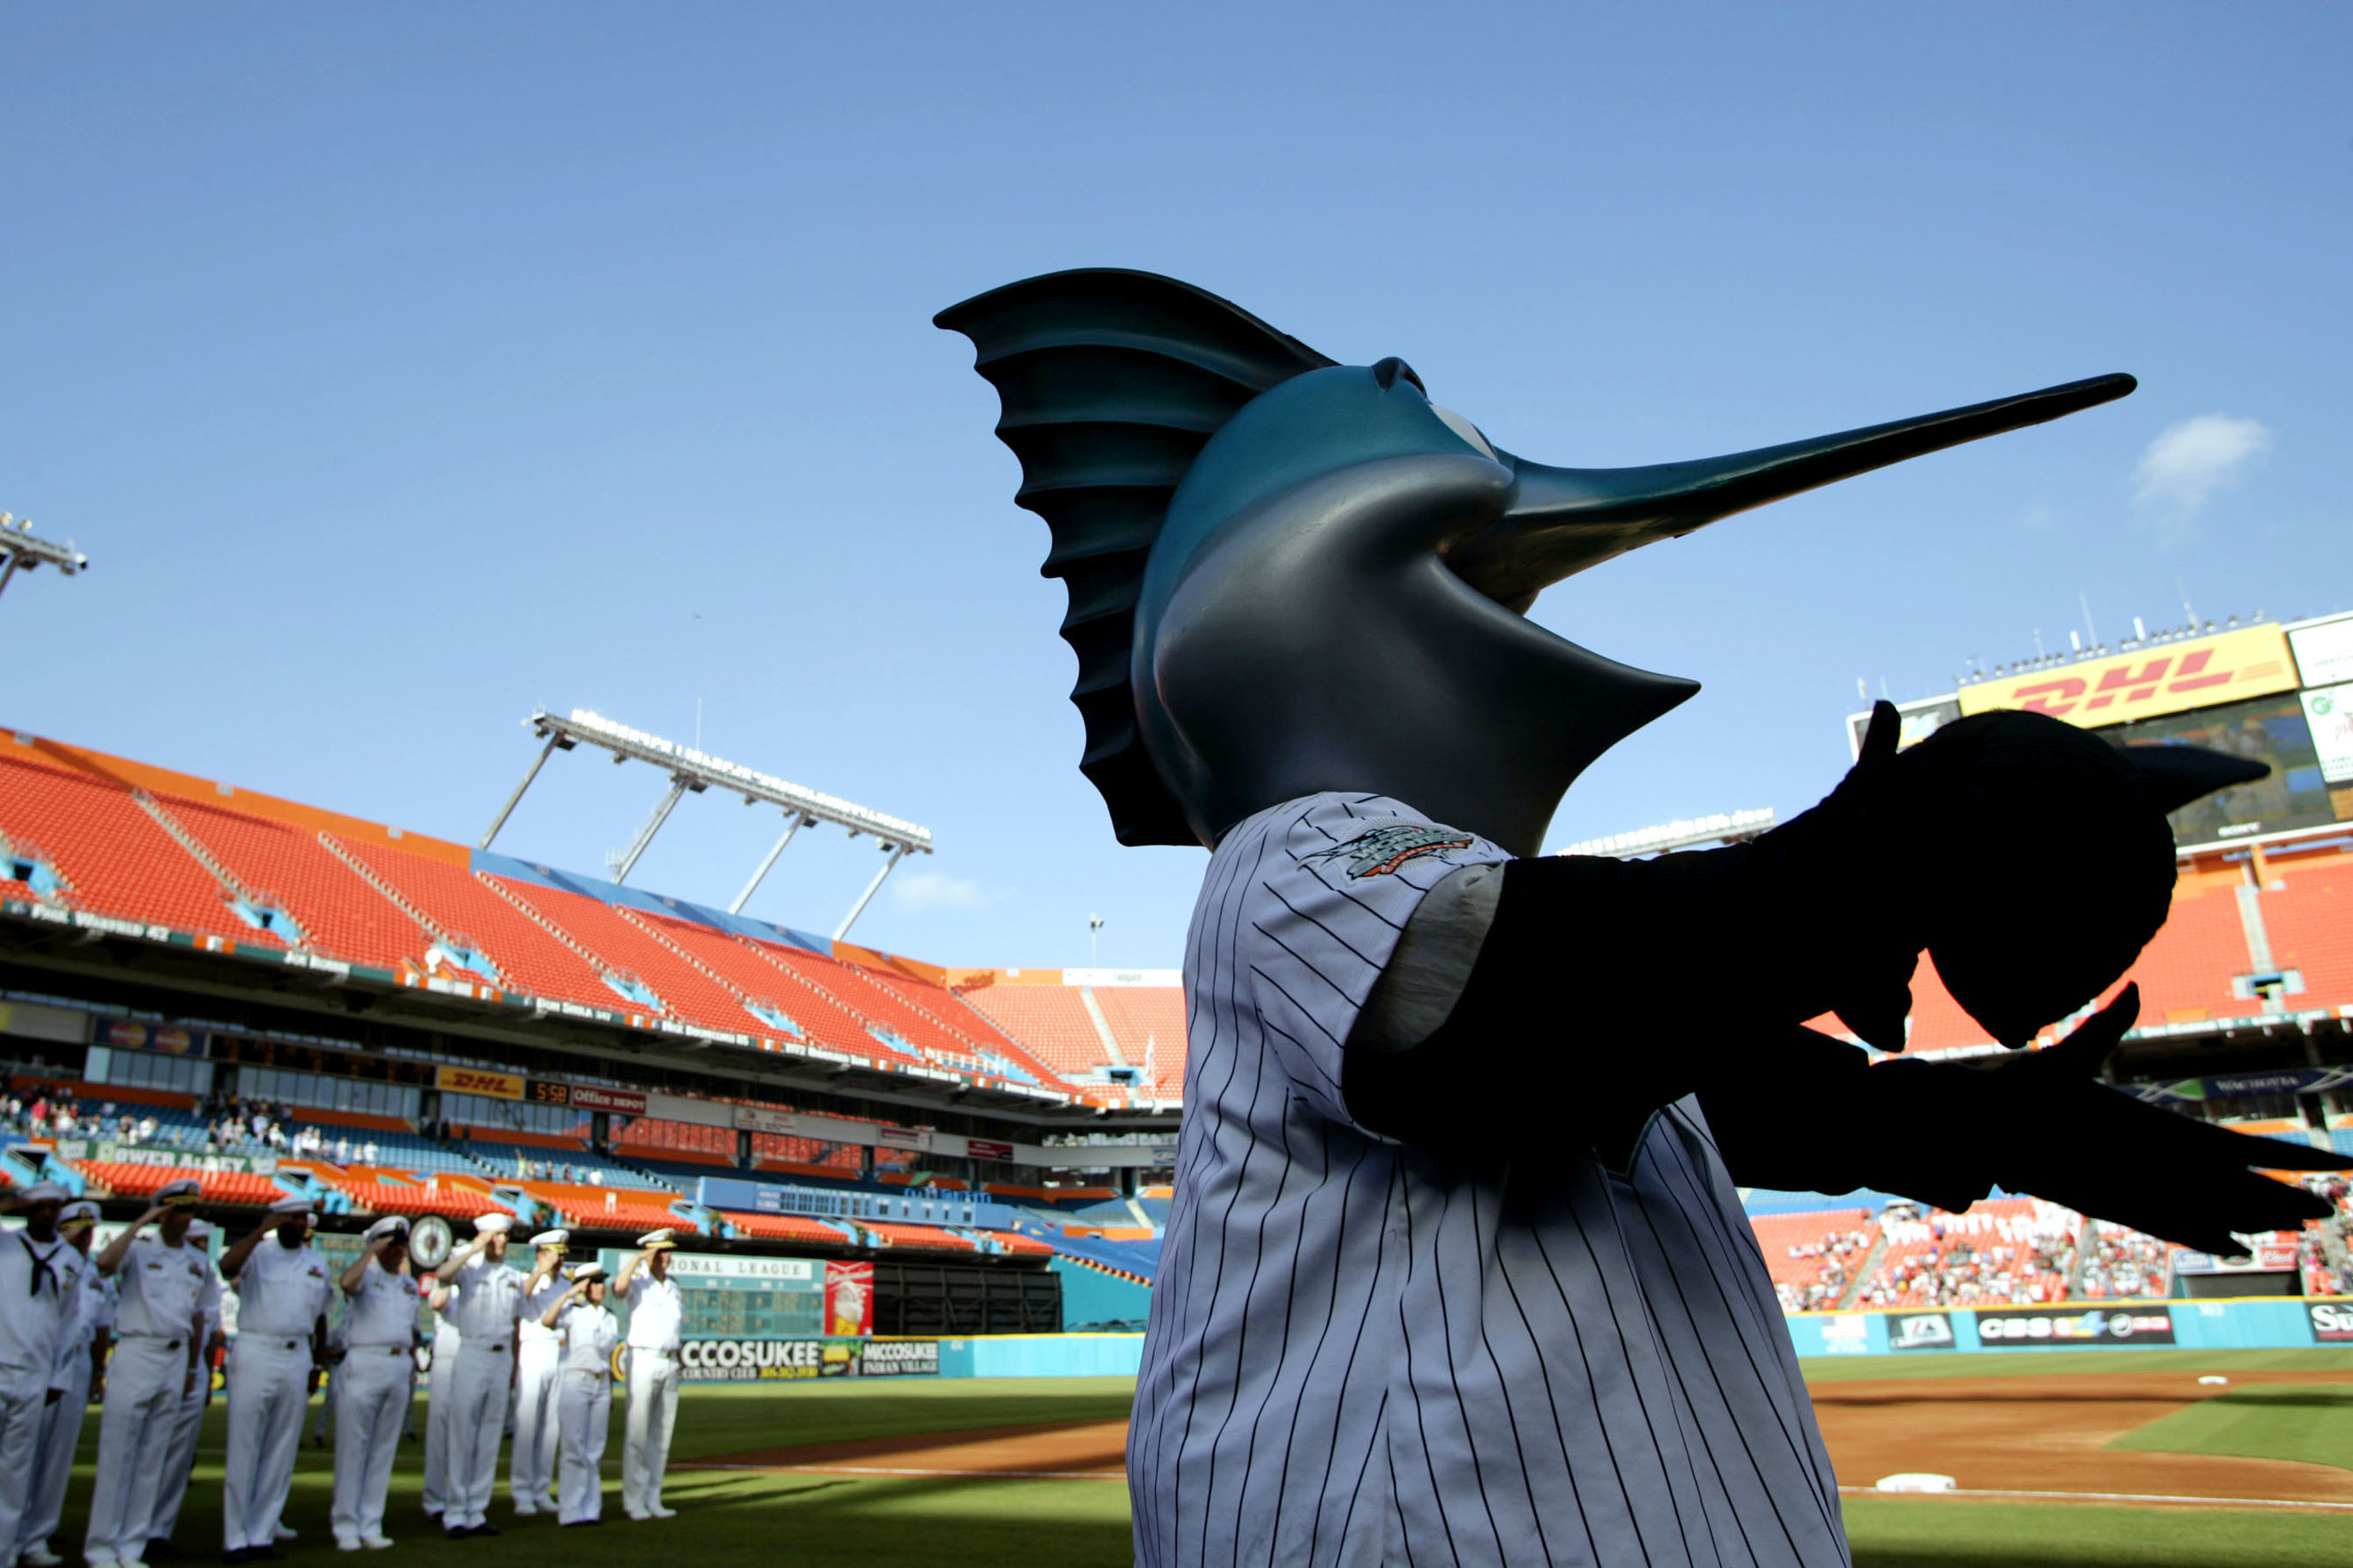 26 Greatest Moments in Miami Marlins' Franchise History